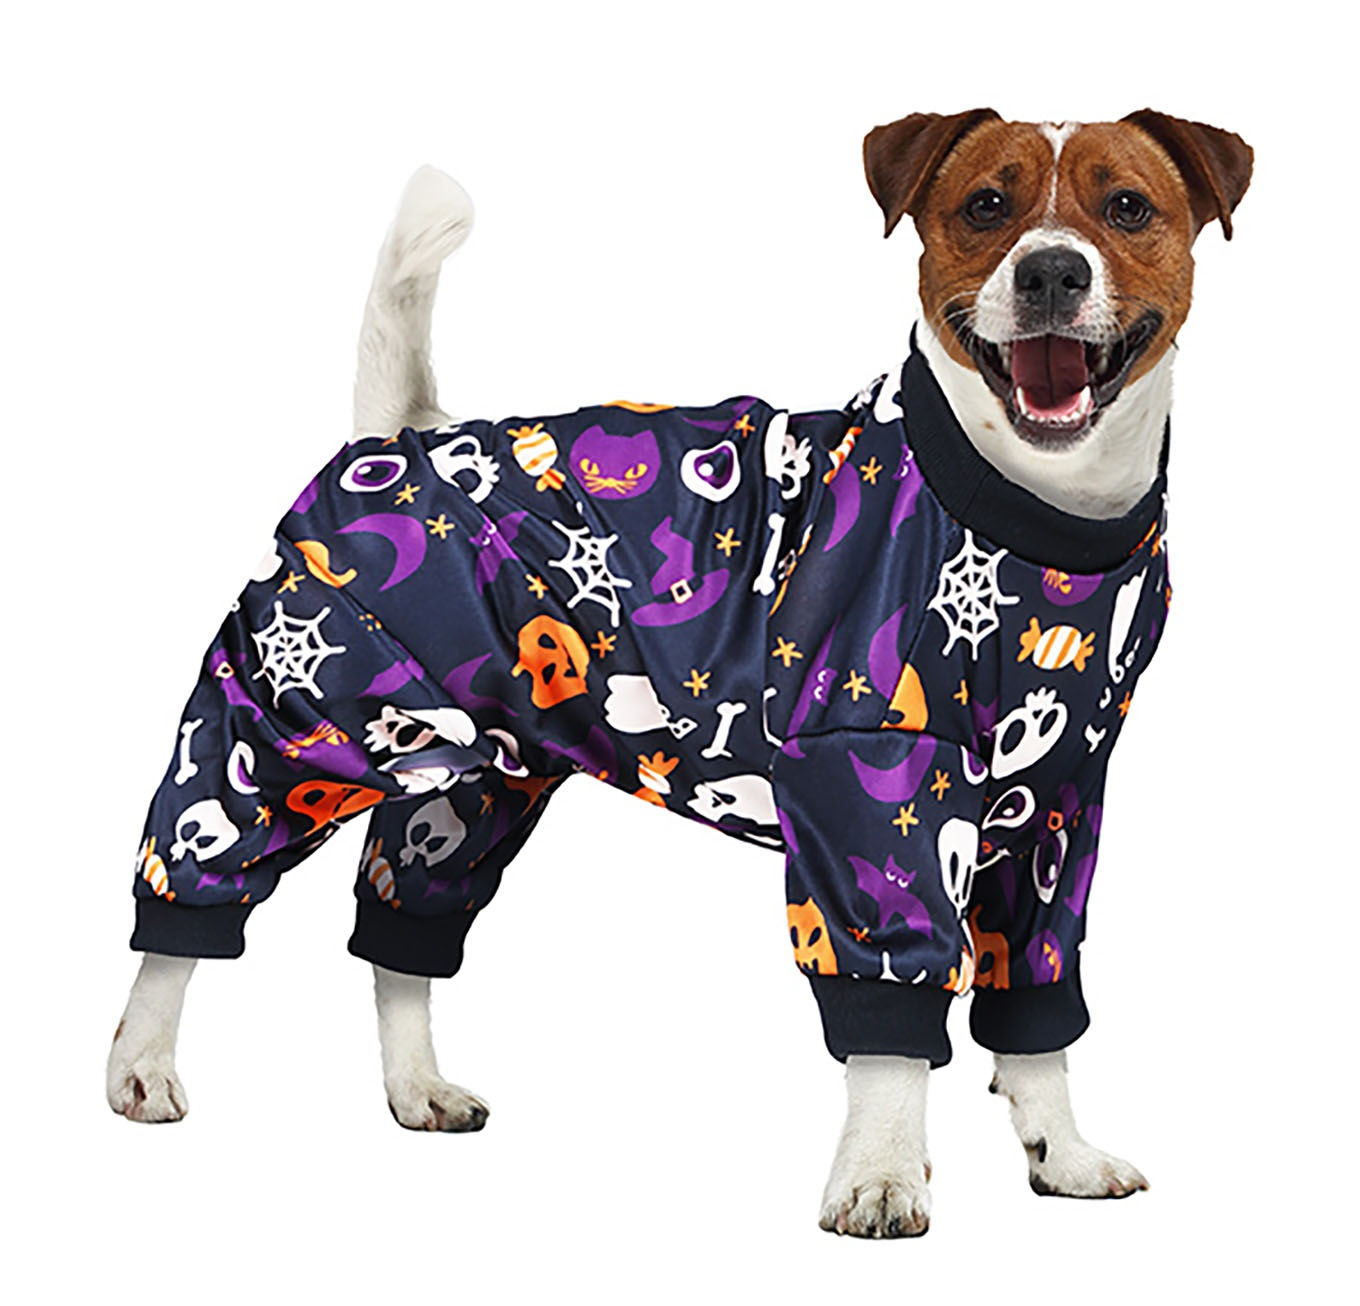 Dog Overall - Halloween Costumes for Dogs: S